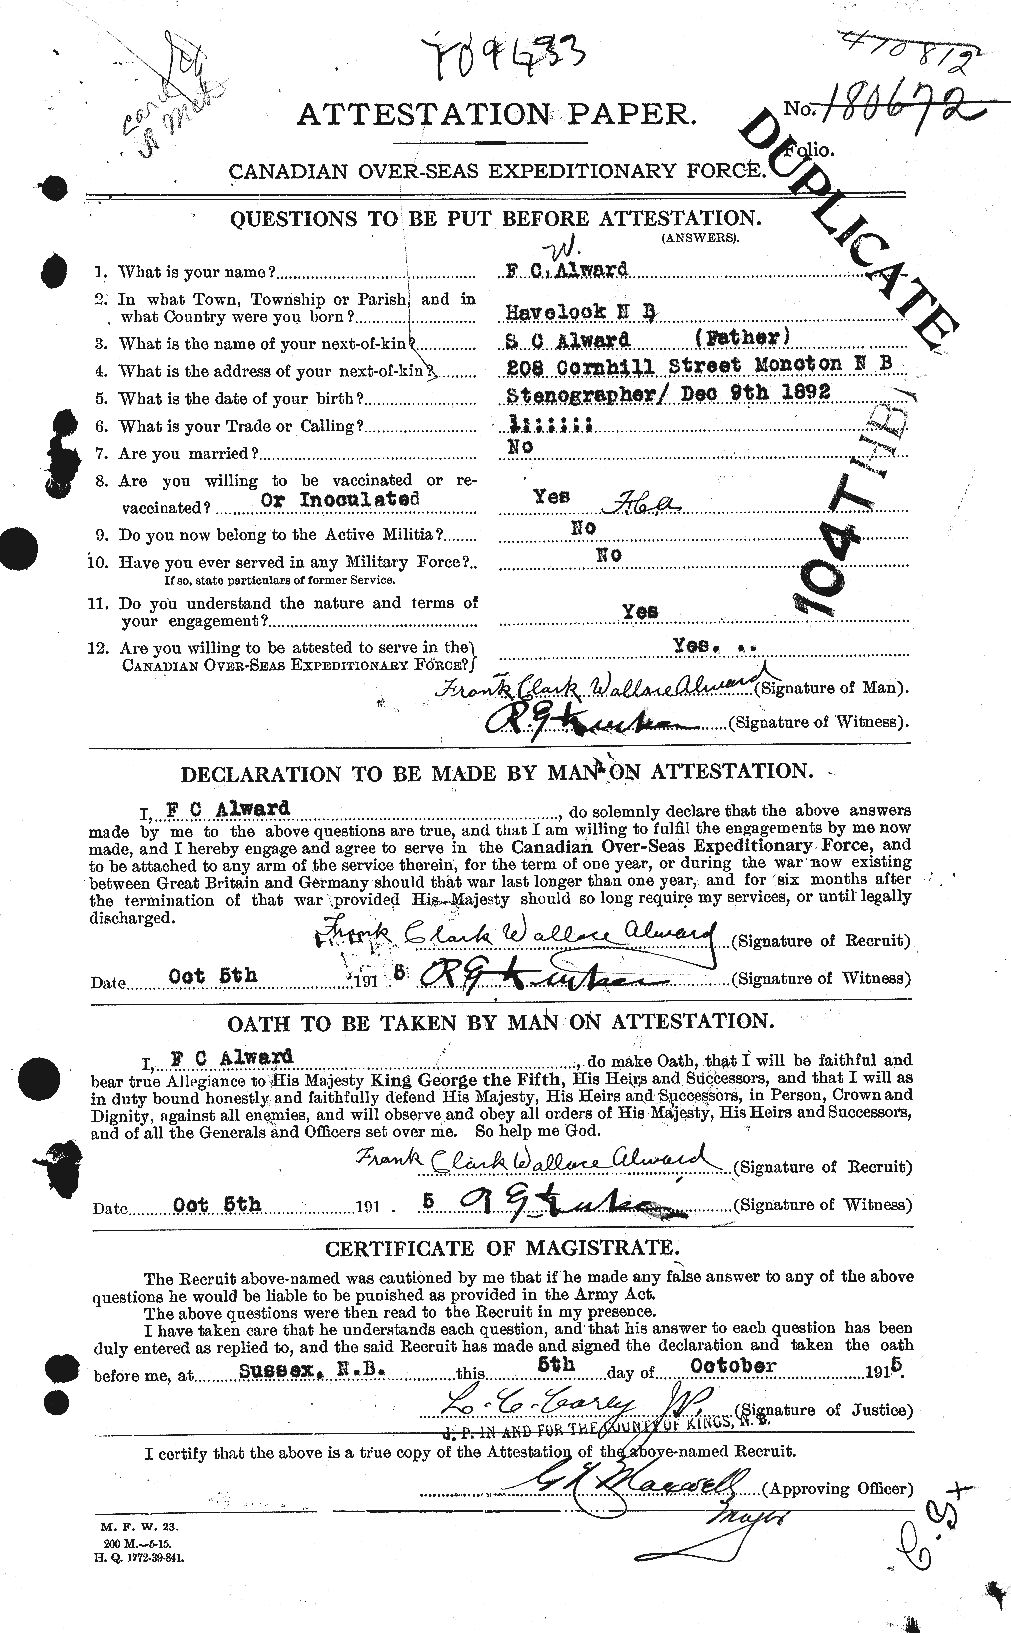 Personnel Records of the First World War - CEF 208046a